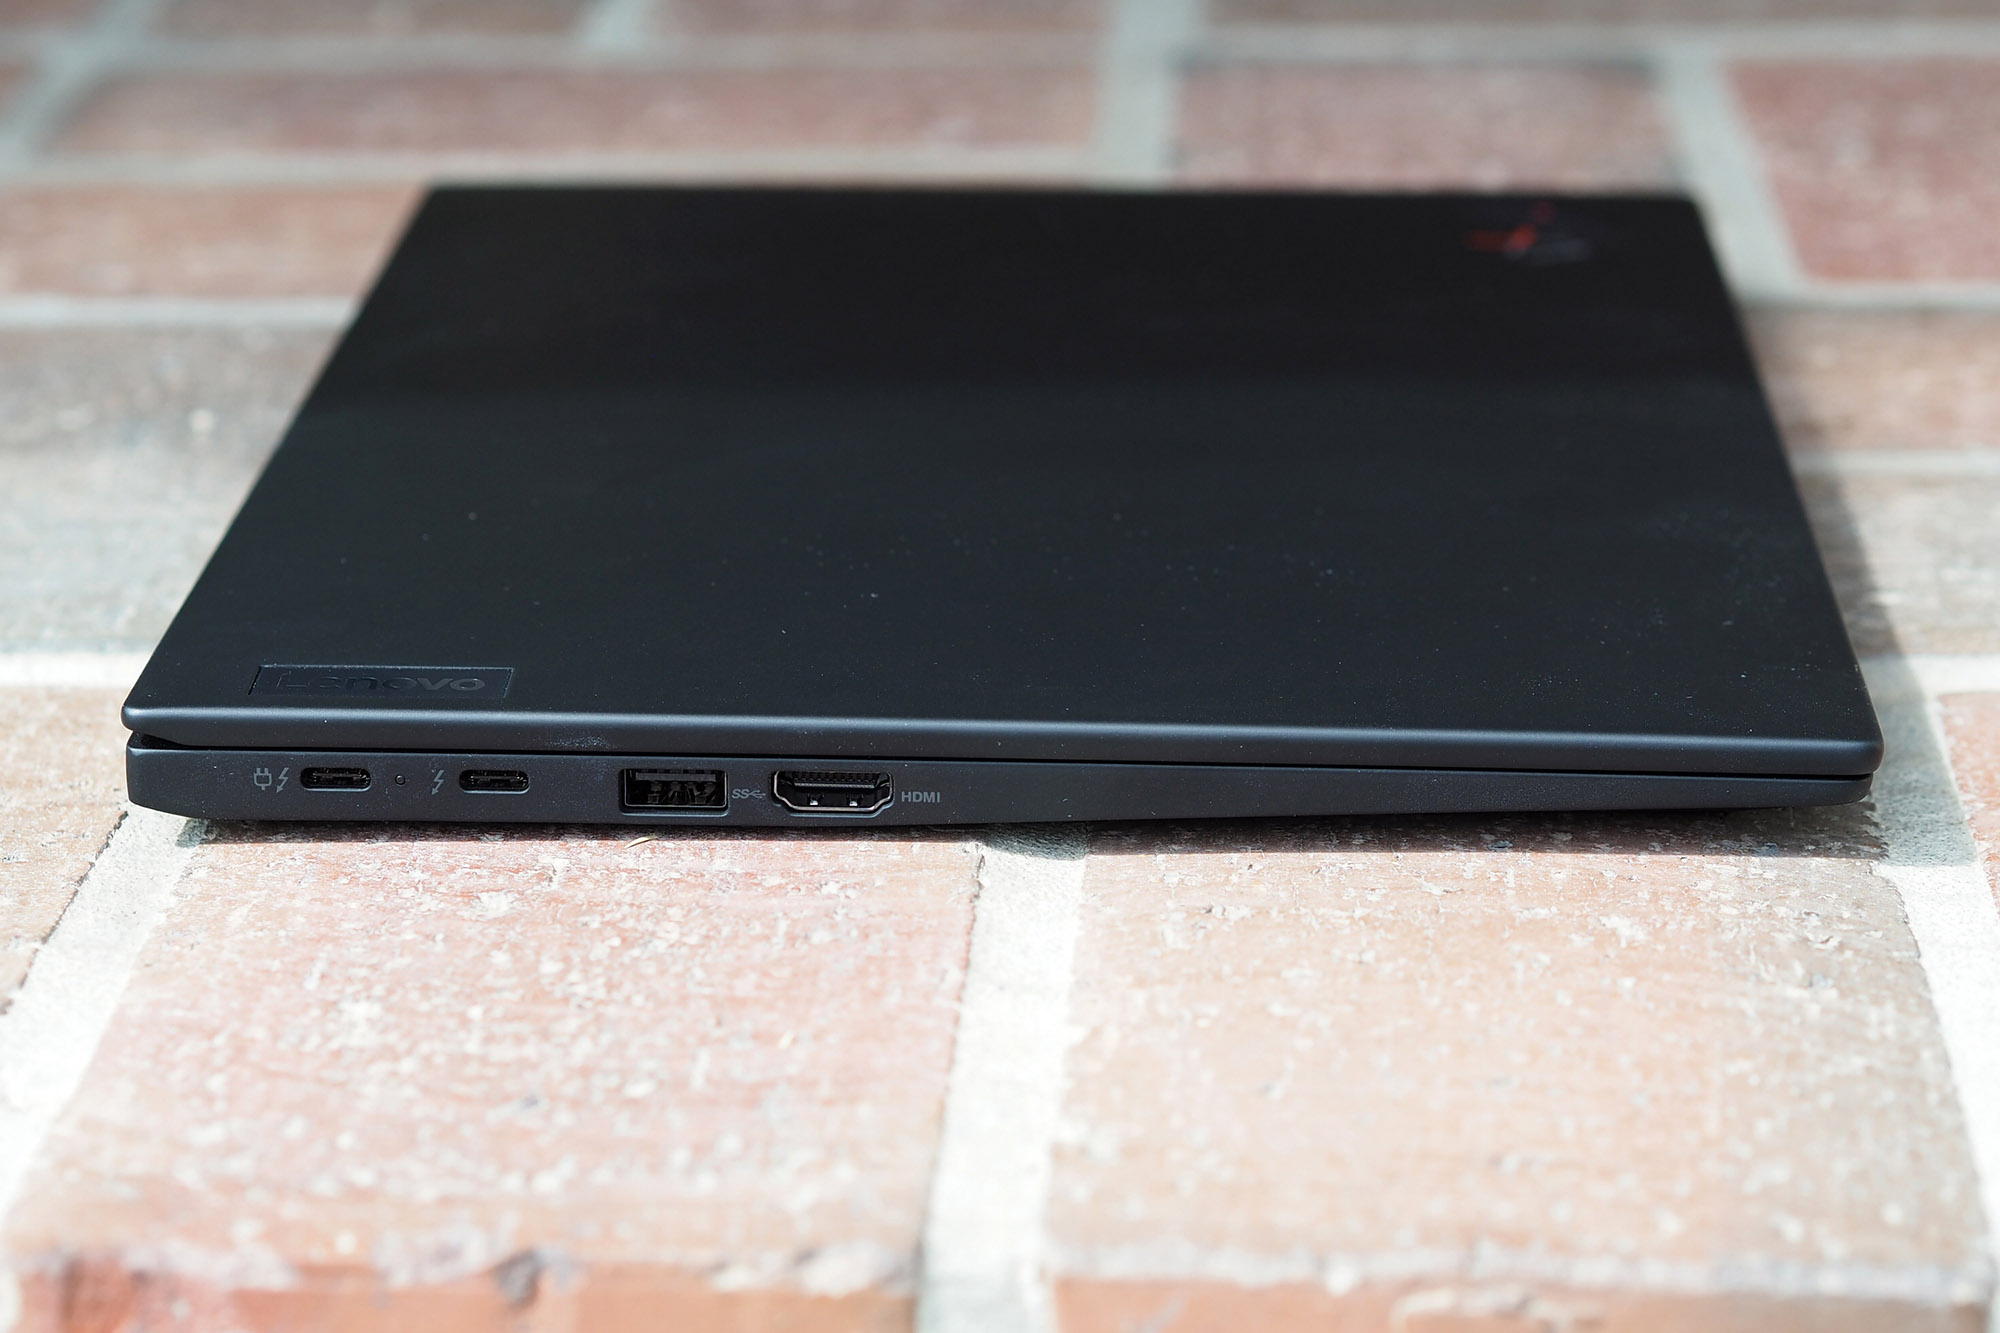 The ThinkPad X1 Carbon Gen 9's USB/Micro USB and HDMI ports on the left side of the laptop.